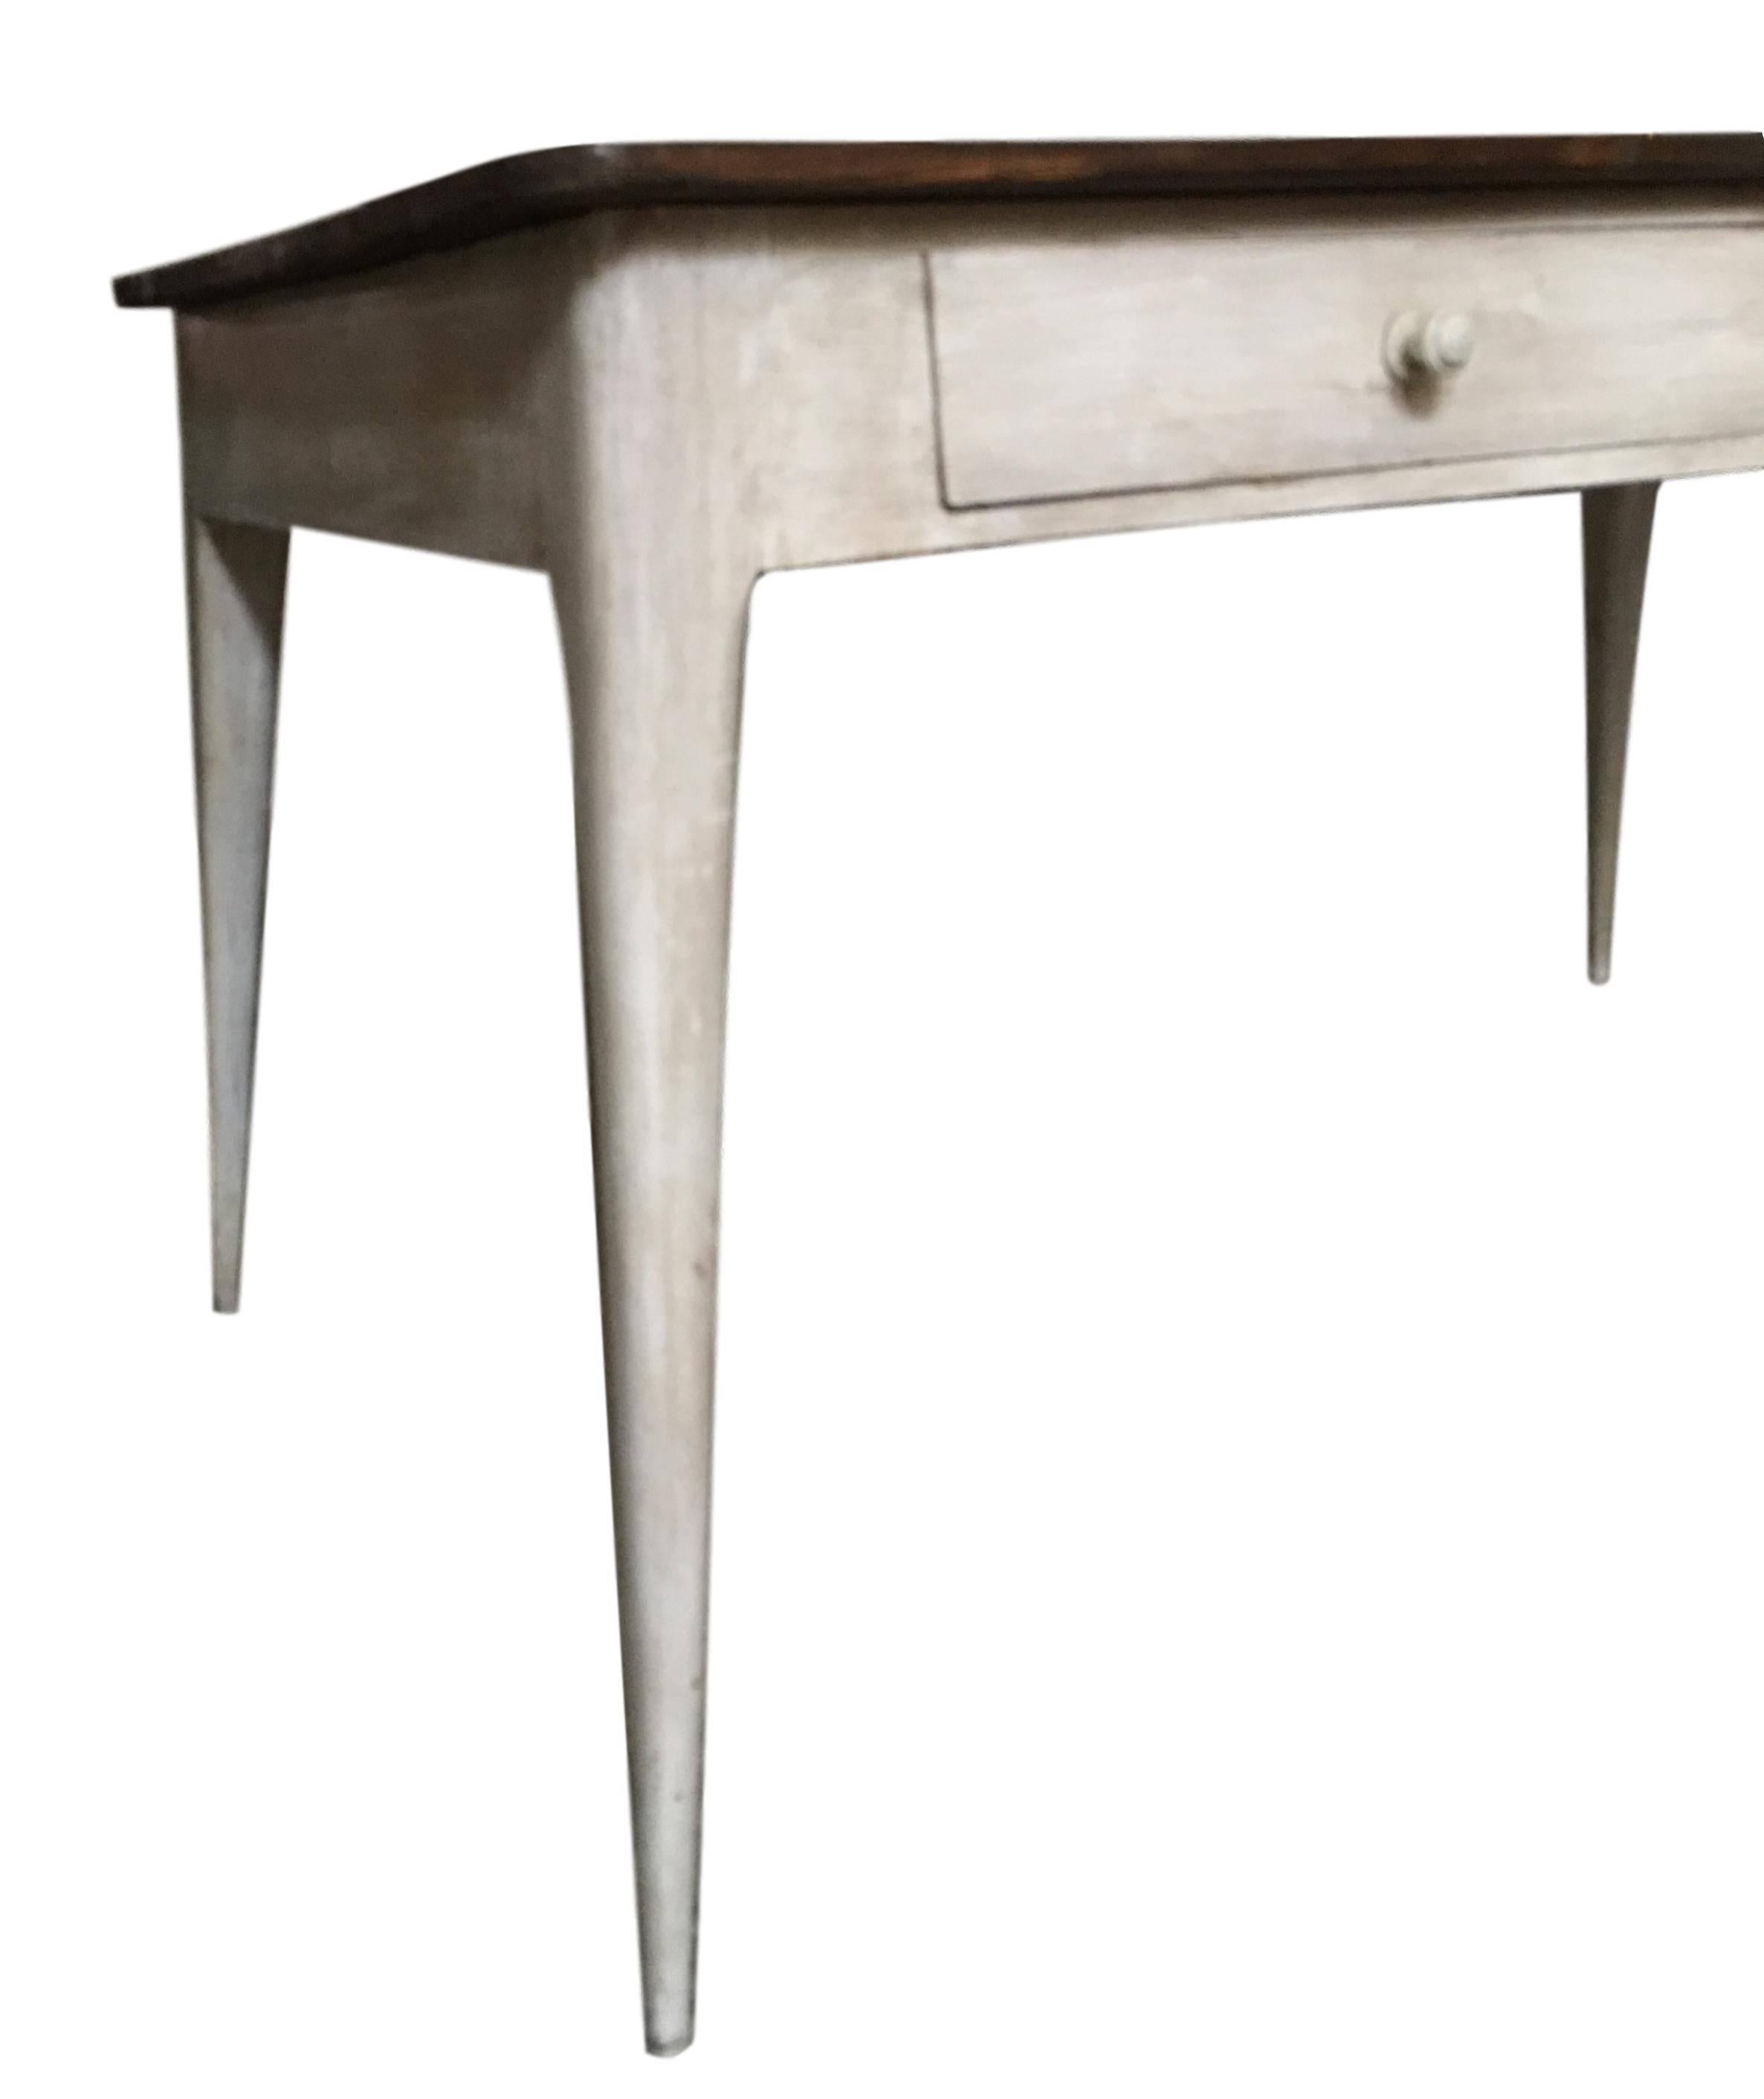 Dining Table or Partners Desk with Four Drawers in Antique White Patina, France 1